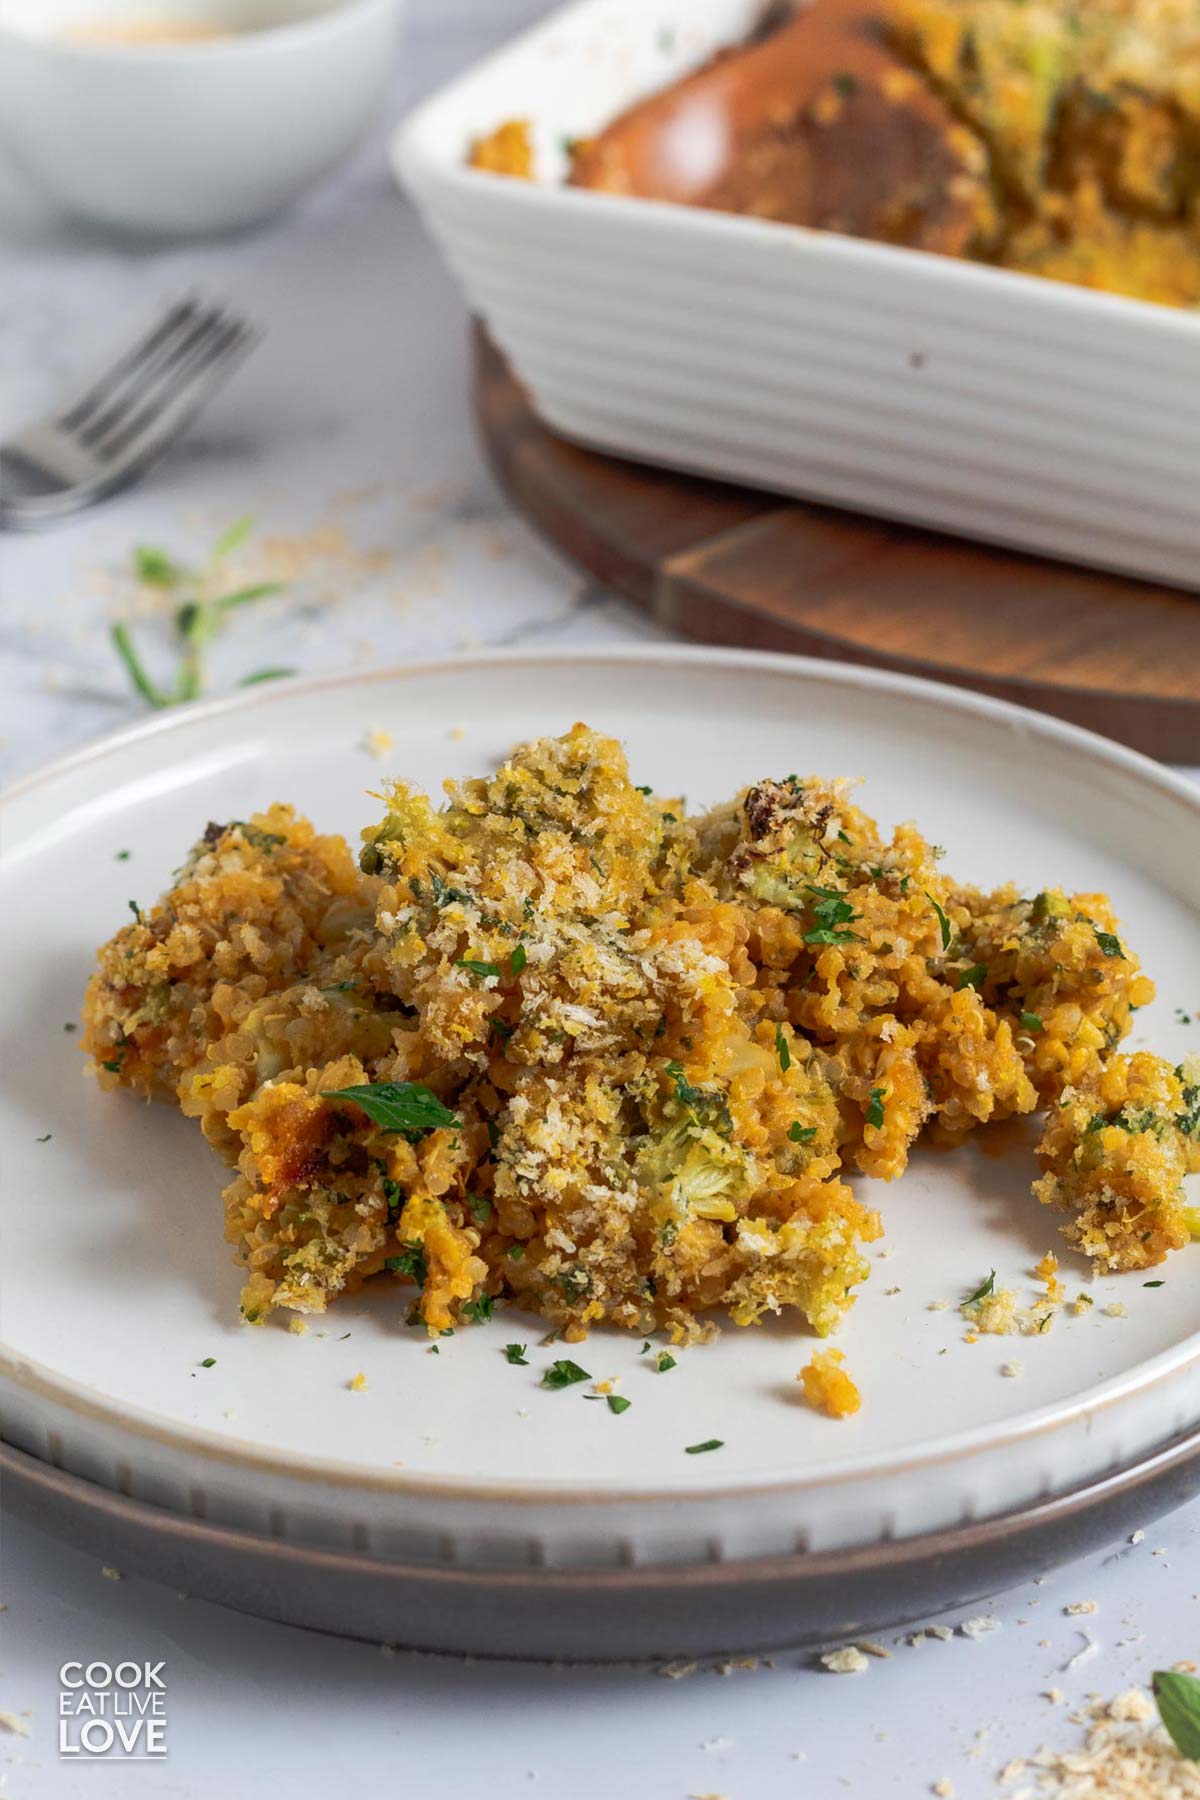 Cheesy quinoa casserole served up on a white plate with the casserole dish in the background.